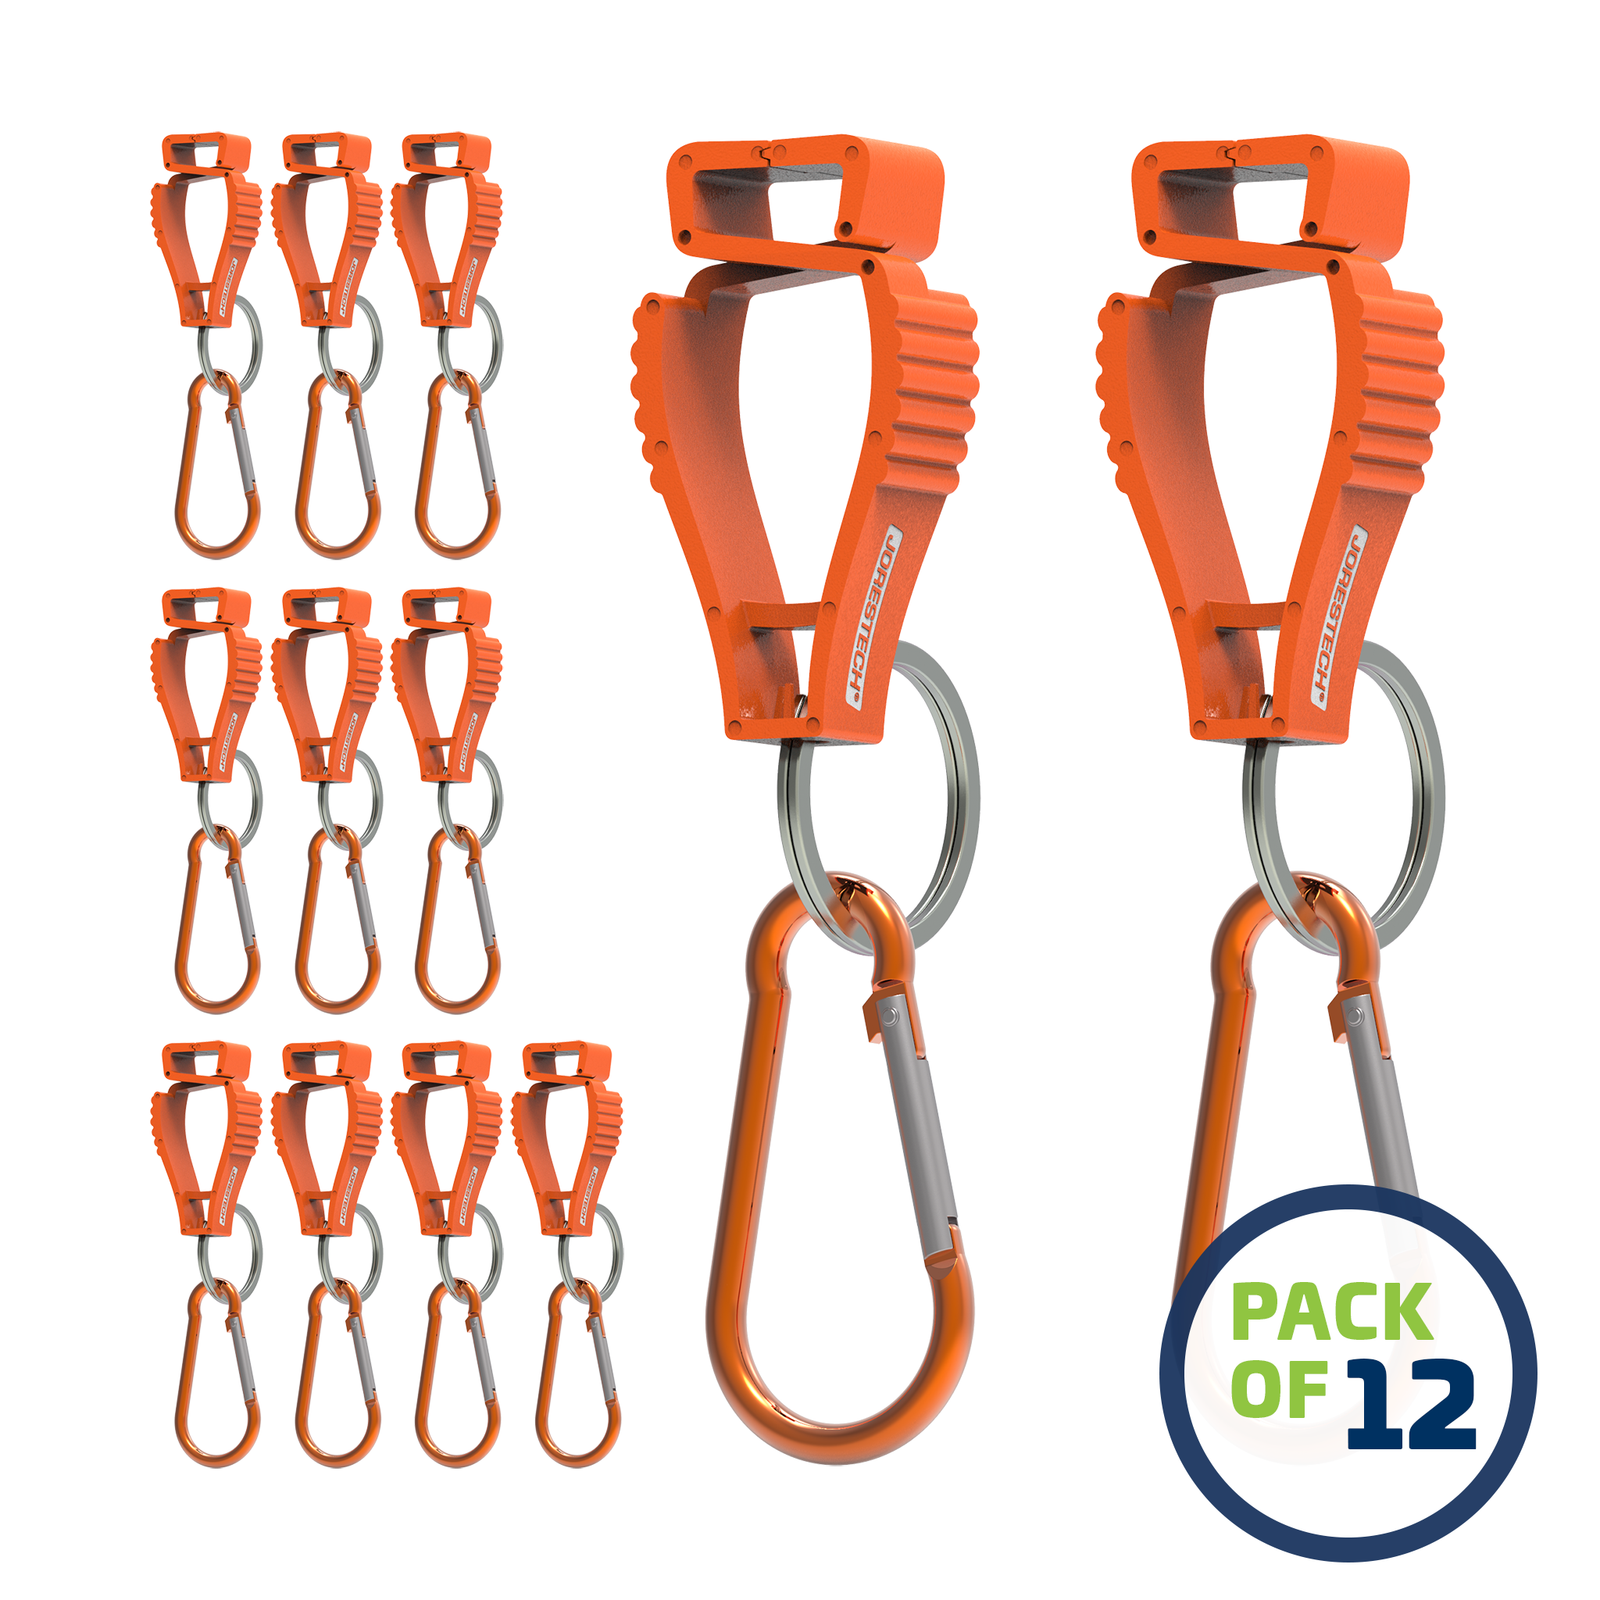 Pack of 12 Orange JORESTECH glove clip safety holders with carabiner 